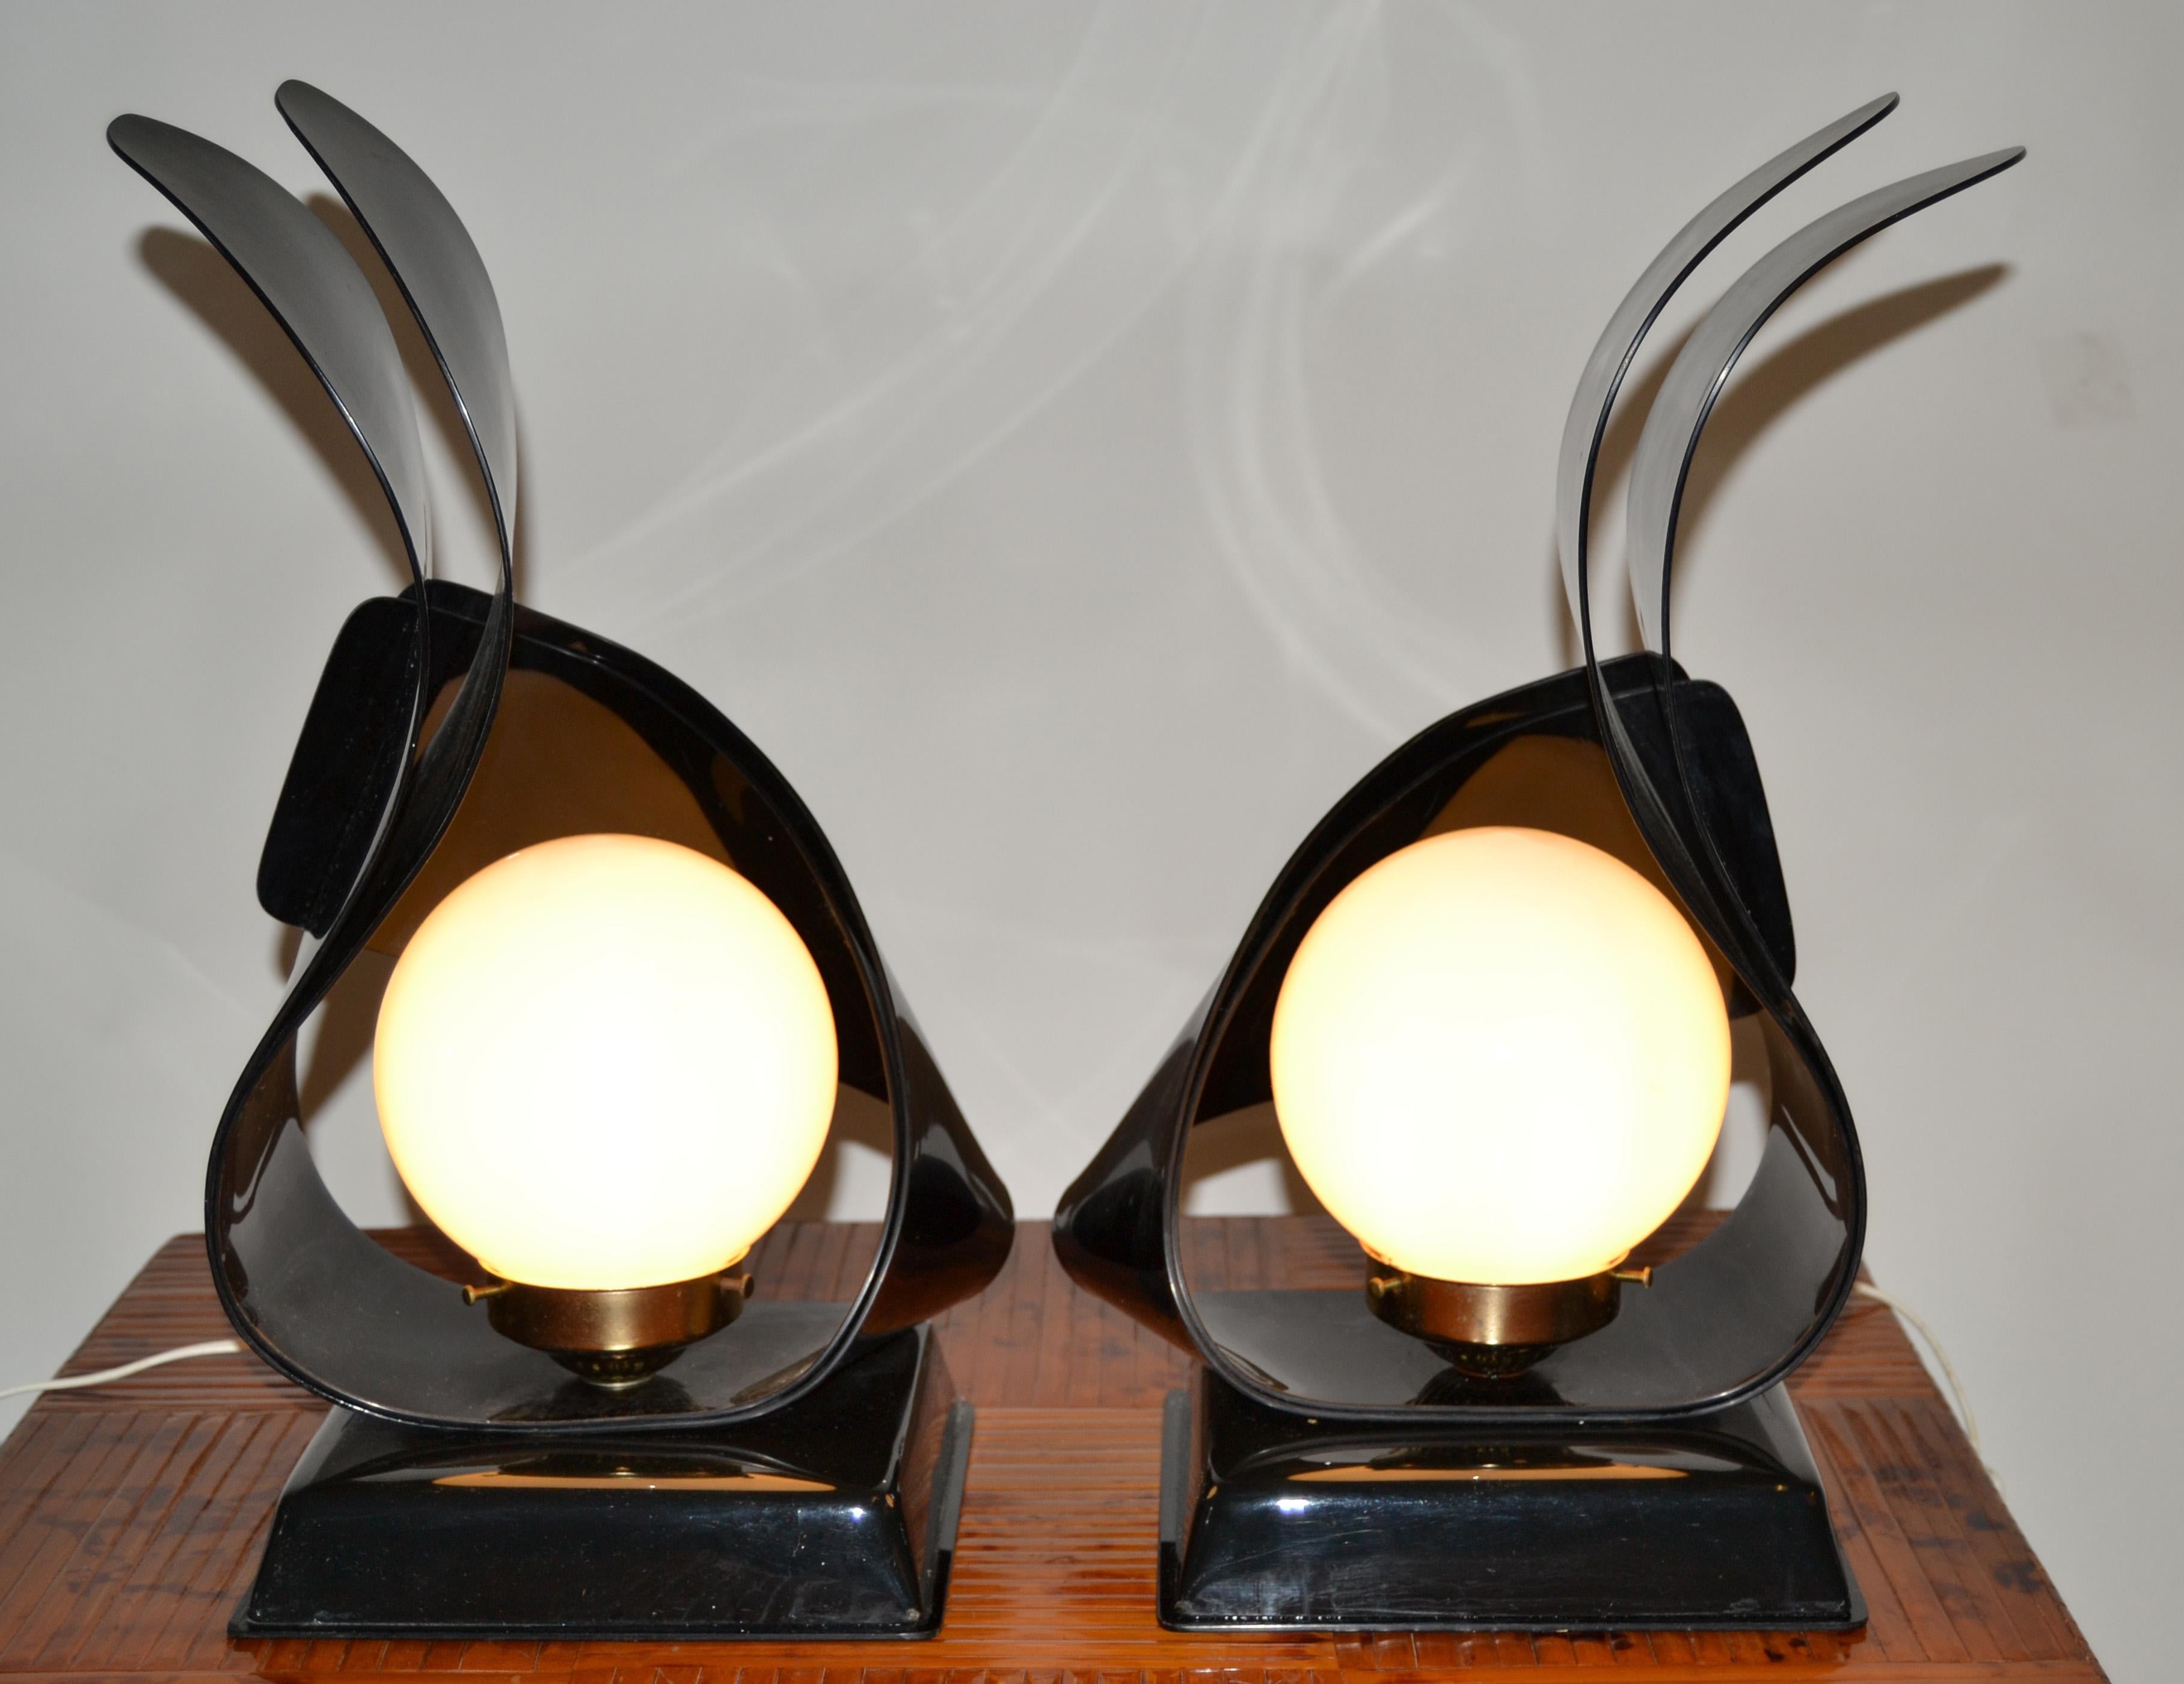 A pair of black acrylic sculptural table lamps by acrylic design.
Each Lamp has a milk glass globe and takes one max. 40 watts light bulb.
In perfect working condition and wired for the U.S.
Priced for the Pair. 
 